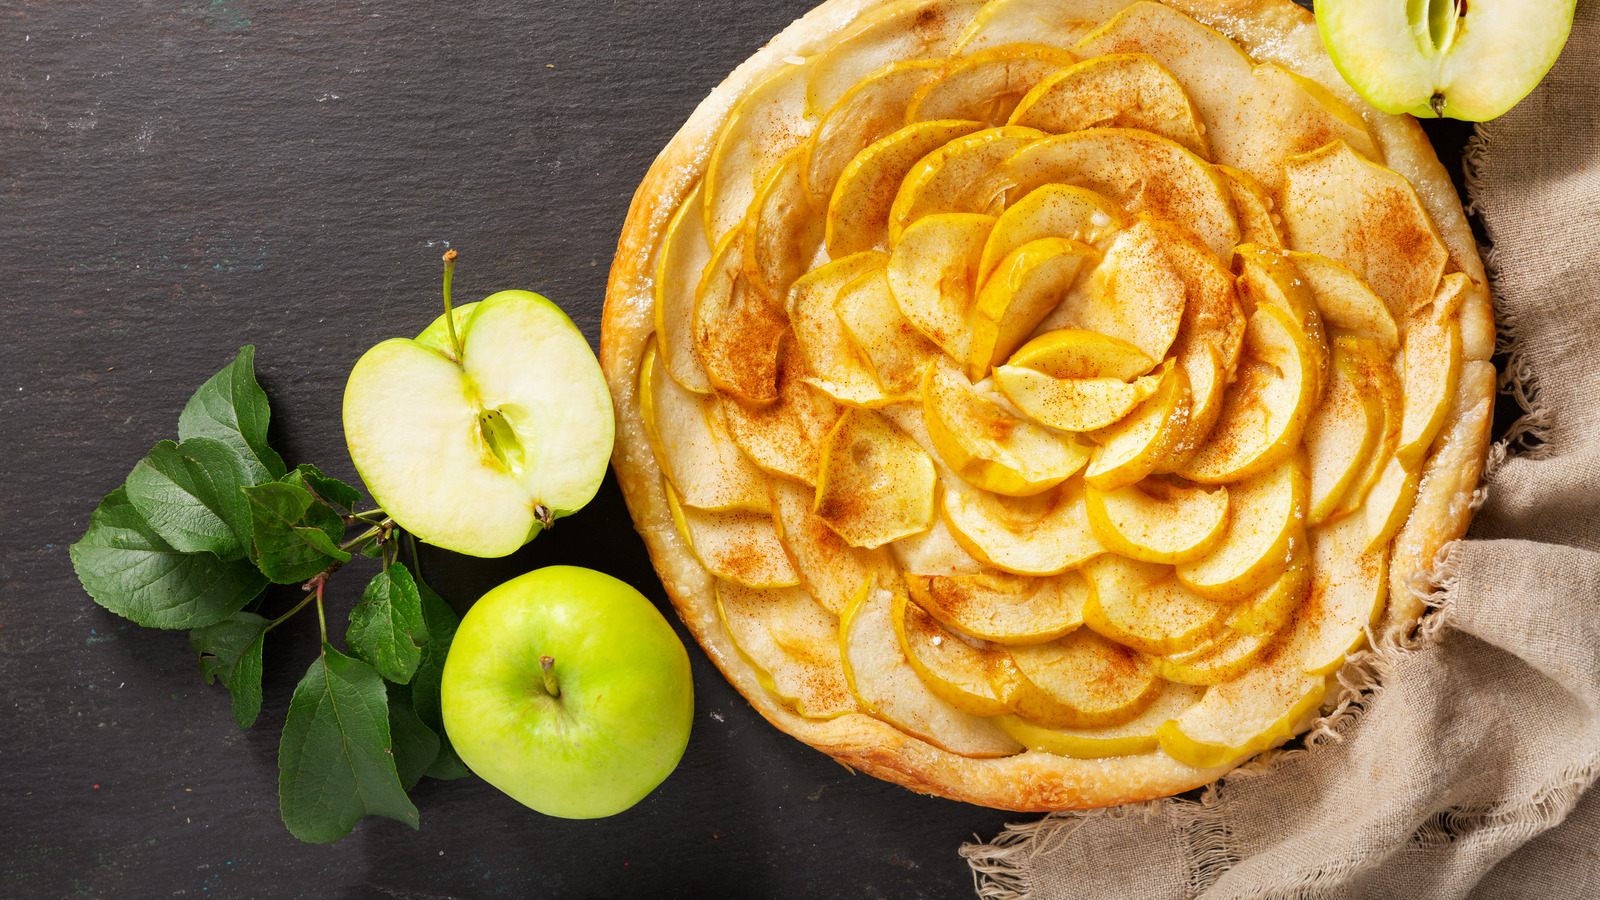 15 Different Types of Apples - Best Apples for Baking and Cooking